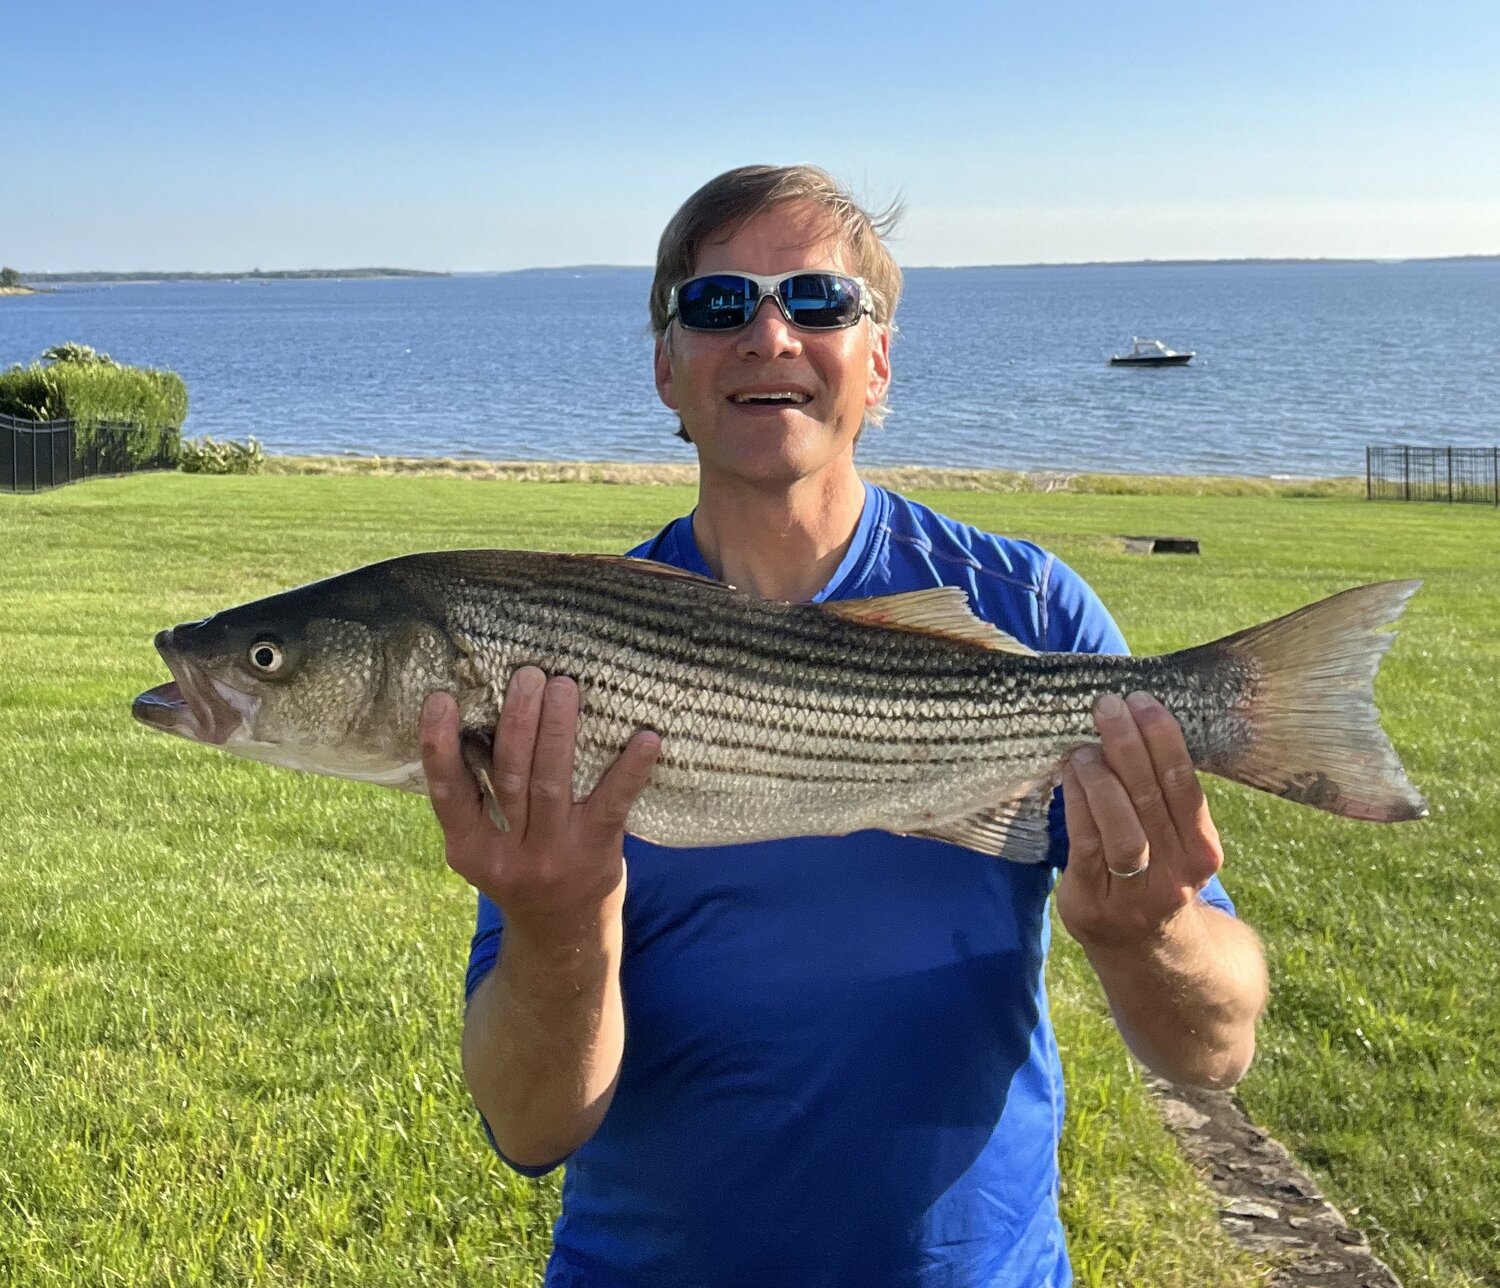 Brian Abbott, of Barrington, said, “Caught this striper (29”, 8 pounds) in 15 feet of water about 100 yards off Barrington Beach with a Yo-Zuri Crystal Minnow.”